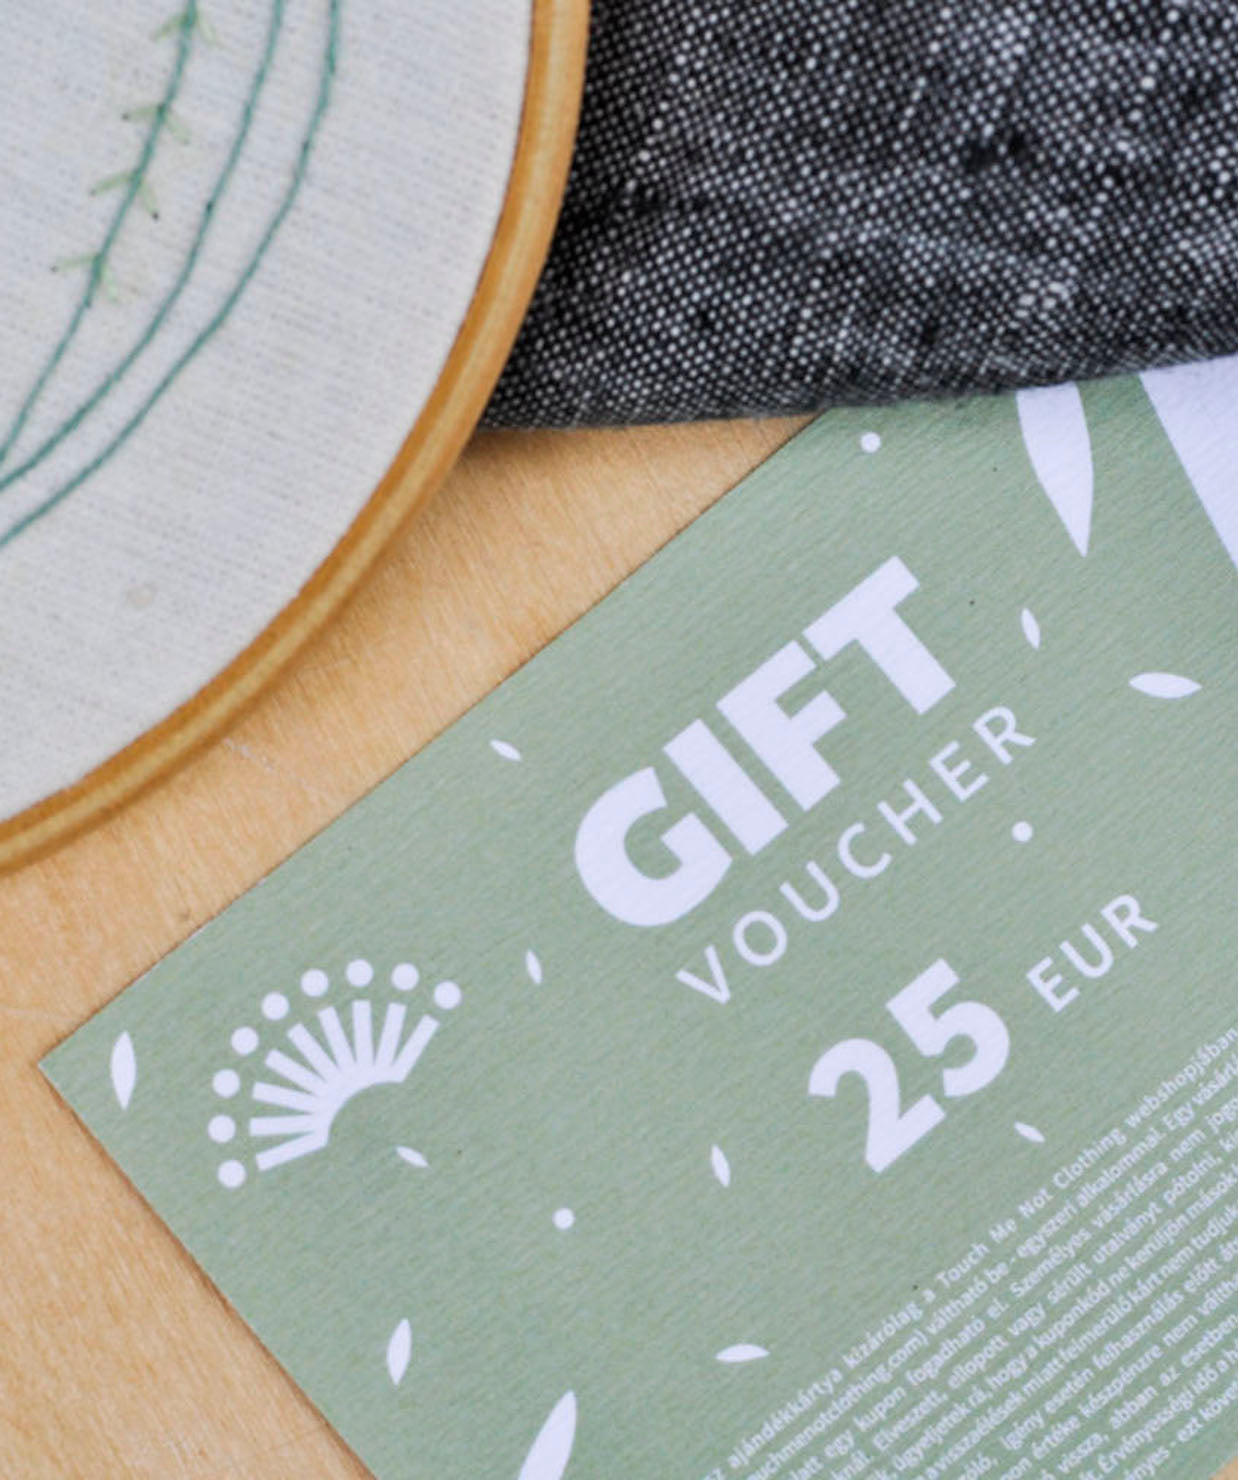 GIFT VOUCHER - Touch Me Not Clothing